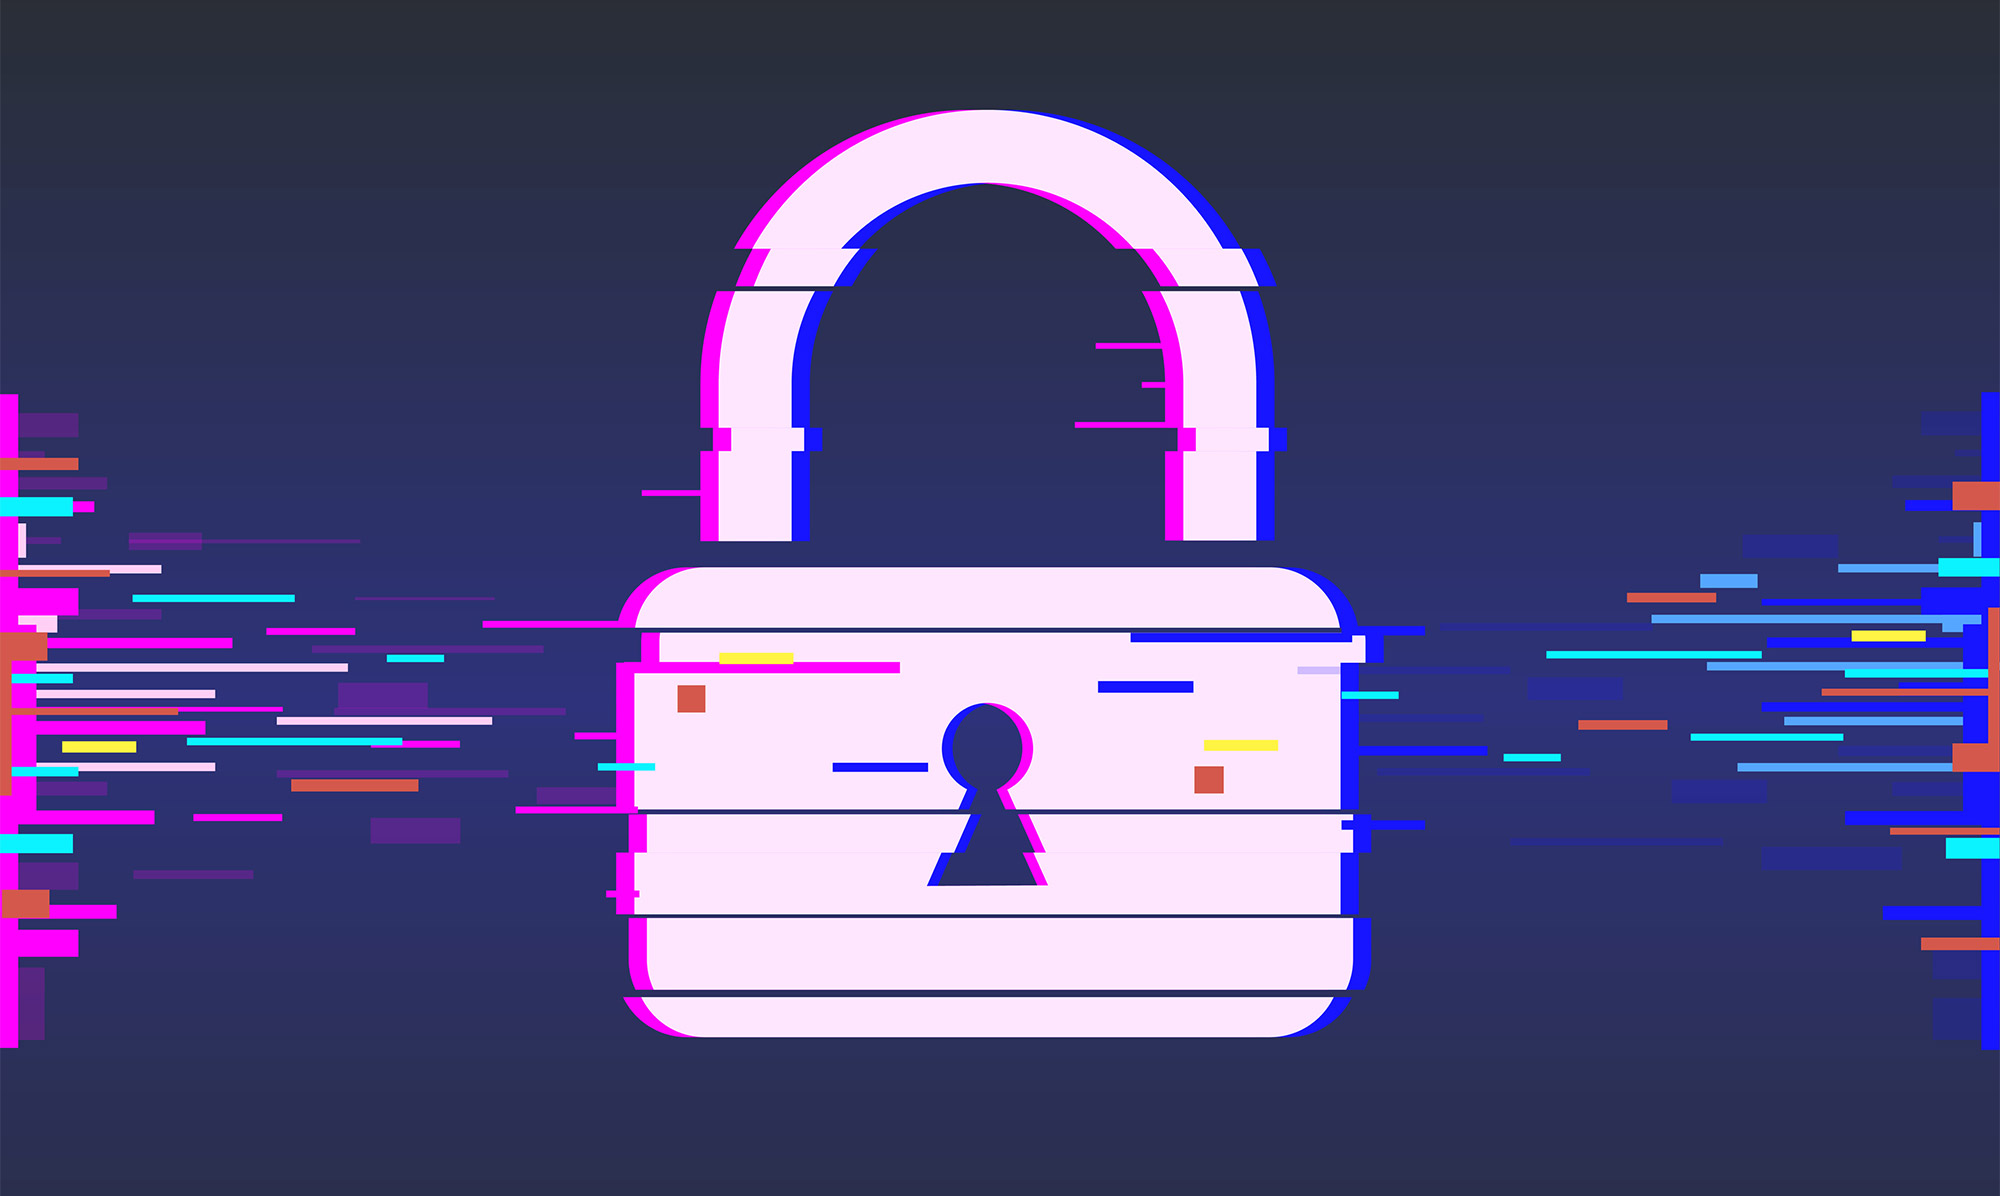 Illustration of padlock with digital glitches in it.